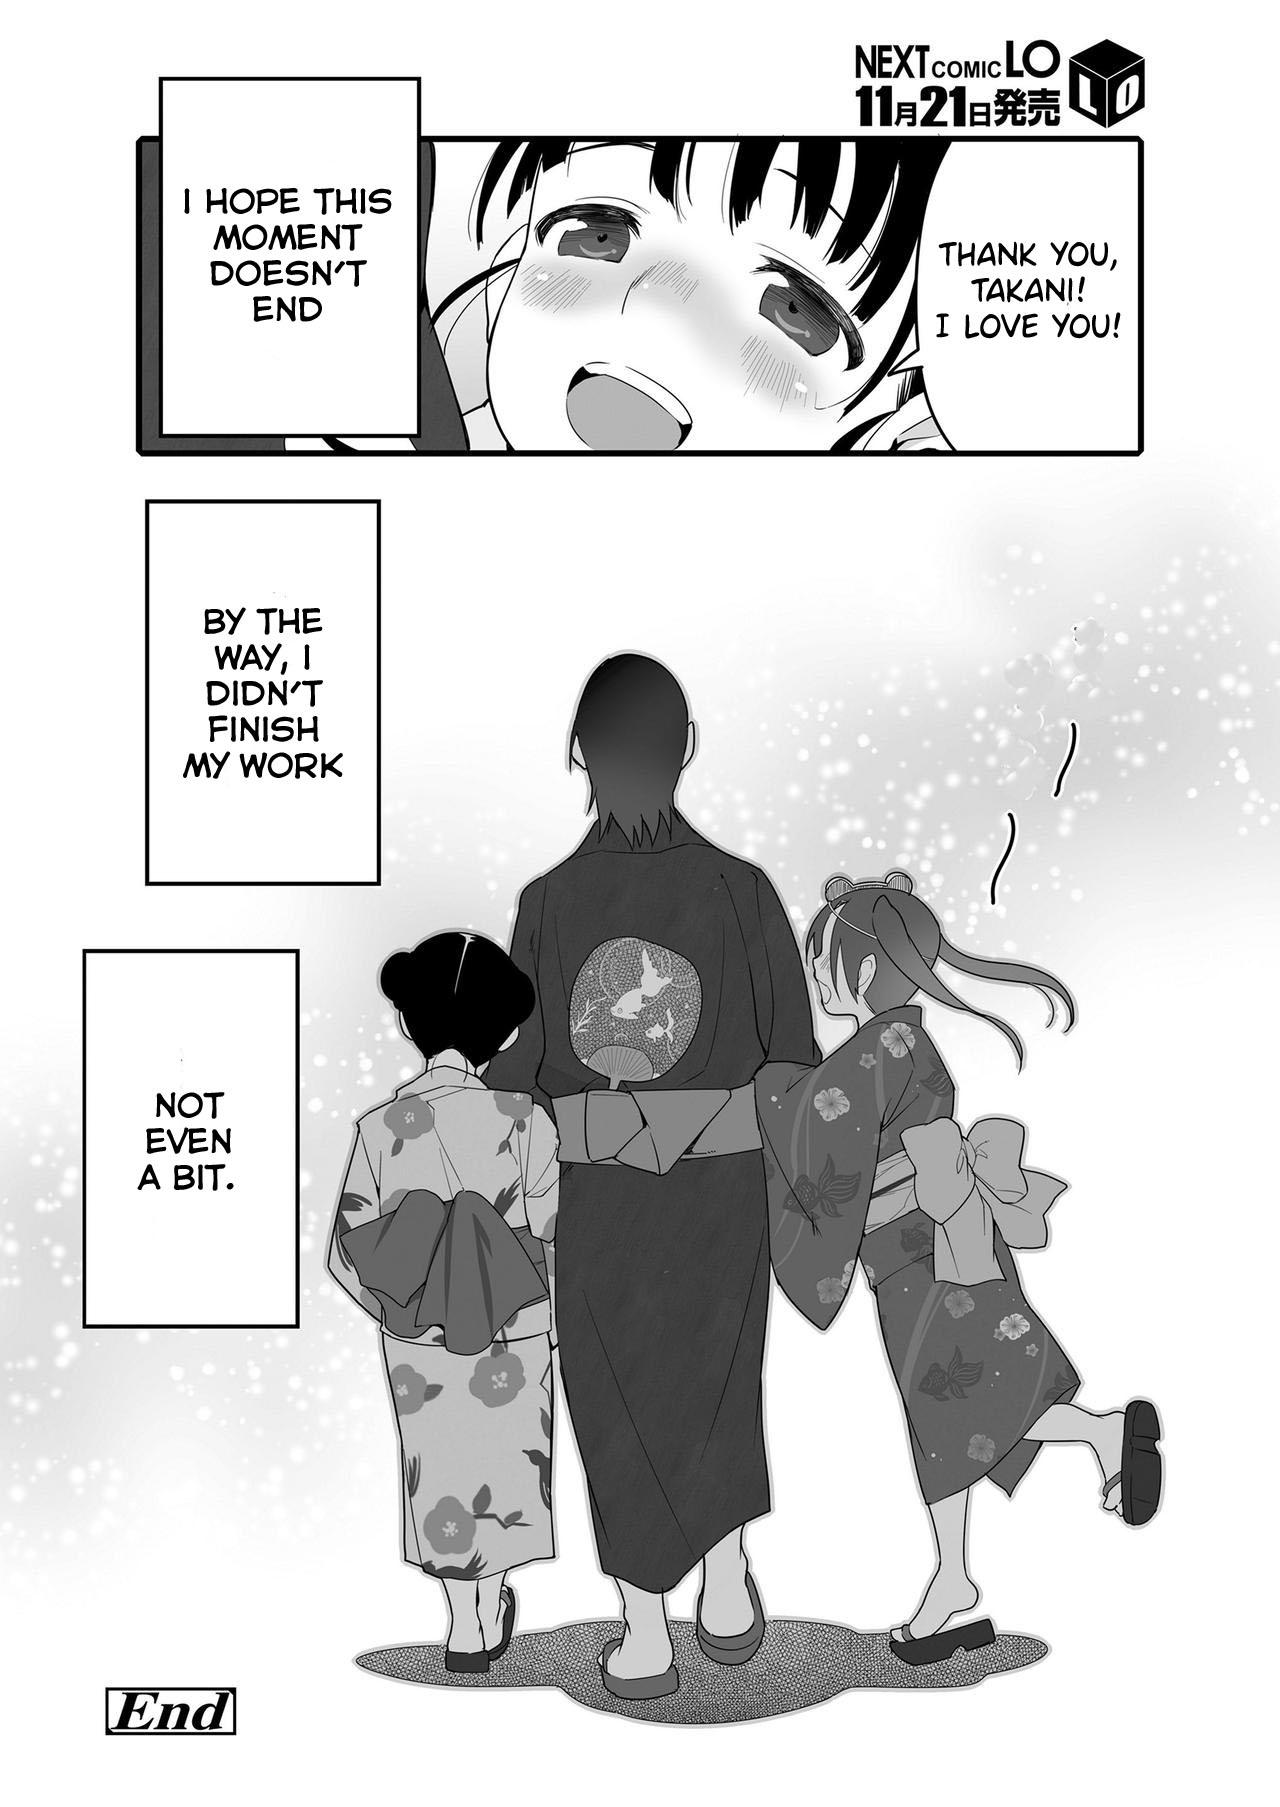 Perfect Tits Uchiage Hanabi, Ane to Miruka? Imouto to Miruka? | Fireworks, Should we see it with the elder sister or the younger sister? Gay Longhair - Page 24